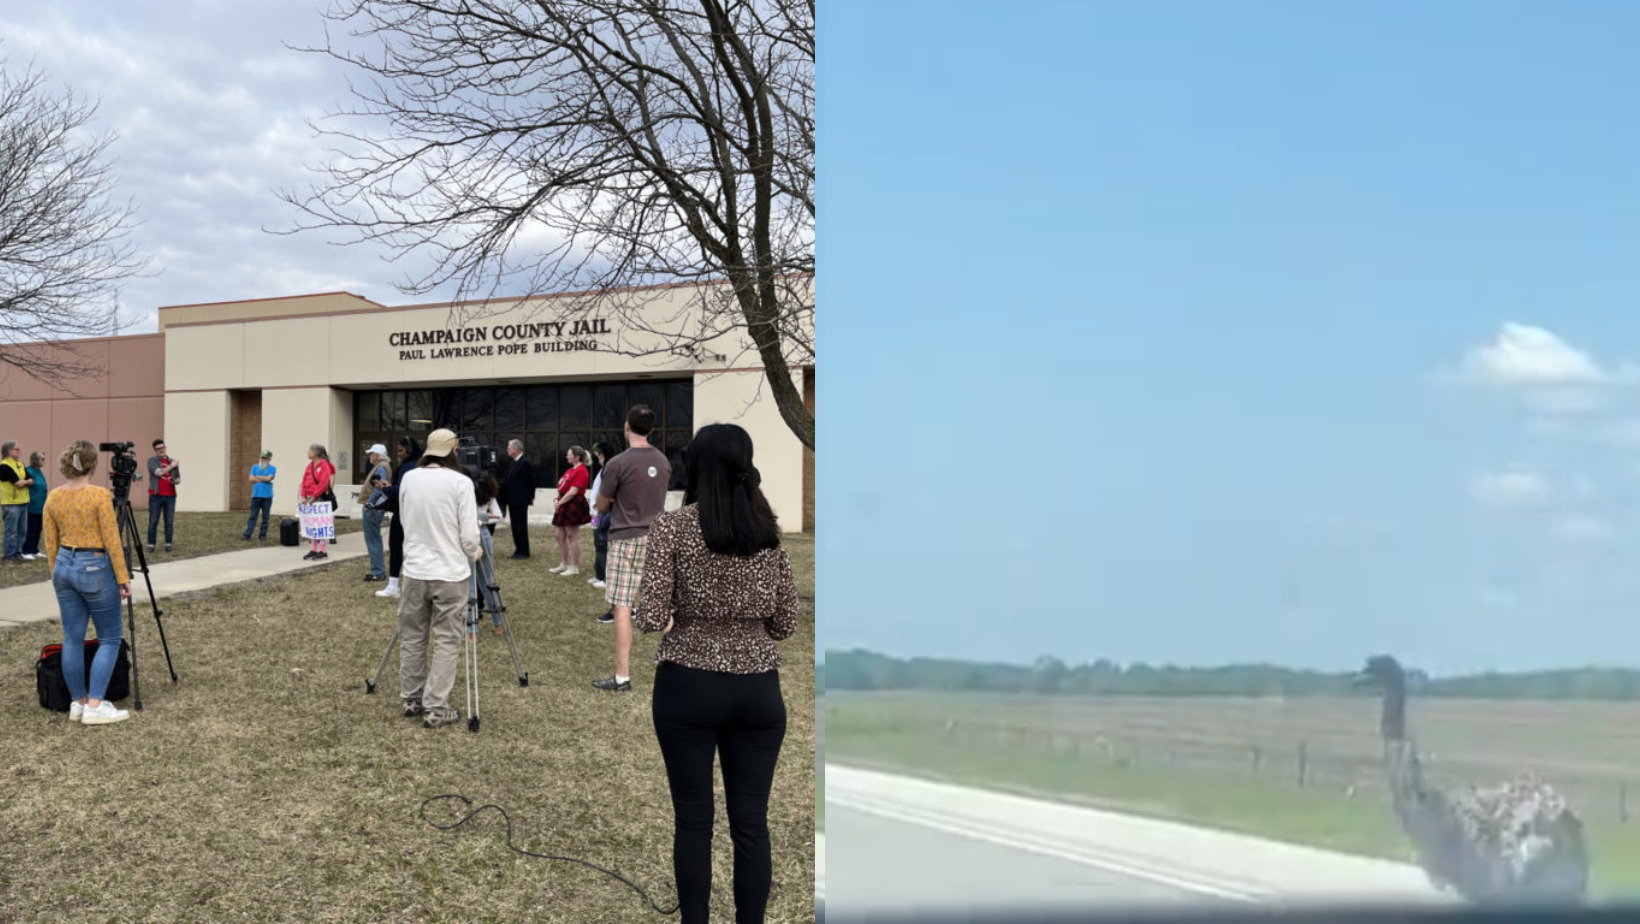 Two side by side photos. One is a gathering of people standing on the lawn in front of a building that says Champaign County Jail. The other is a grainy screenshot of an emu alongside a highway.